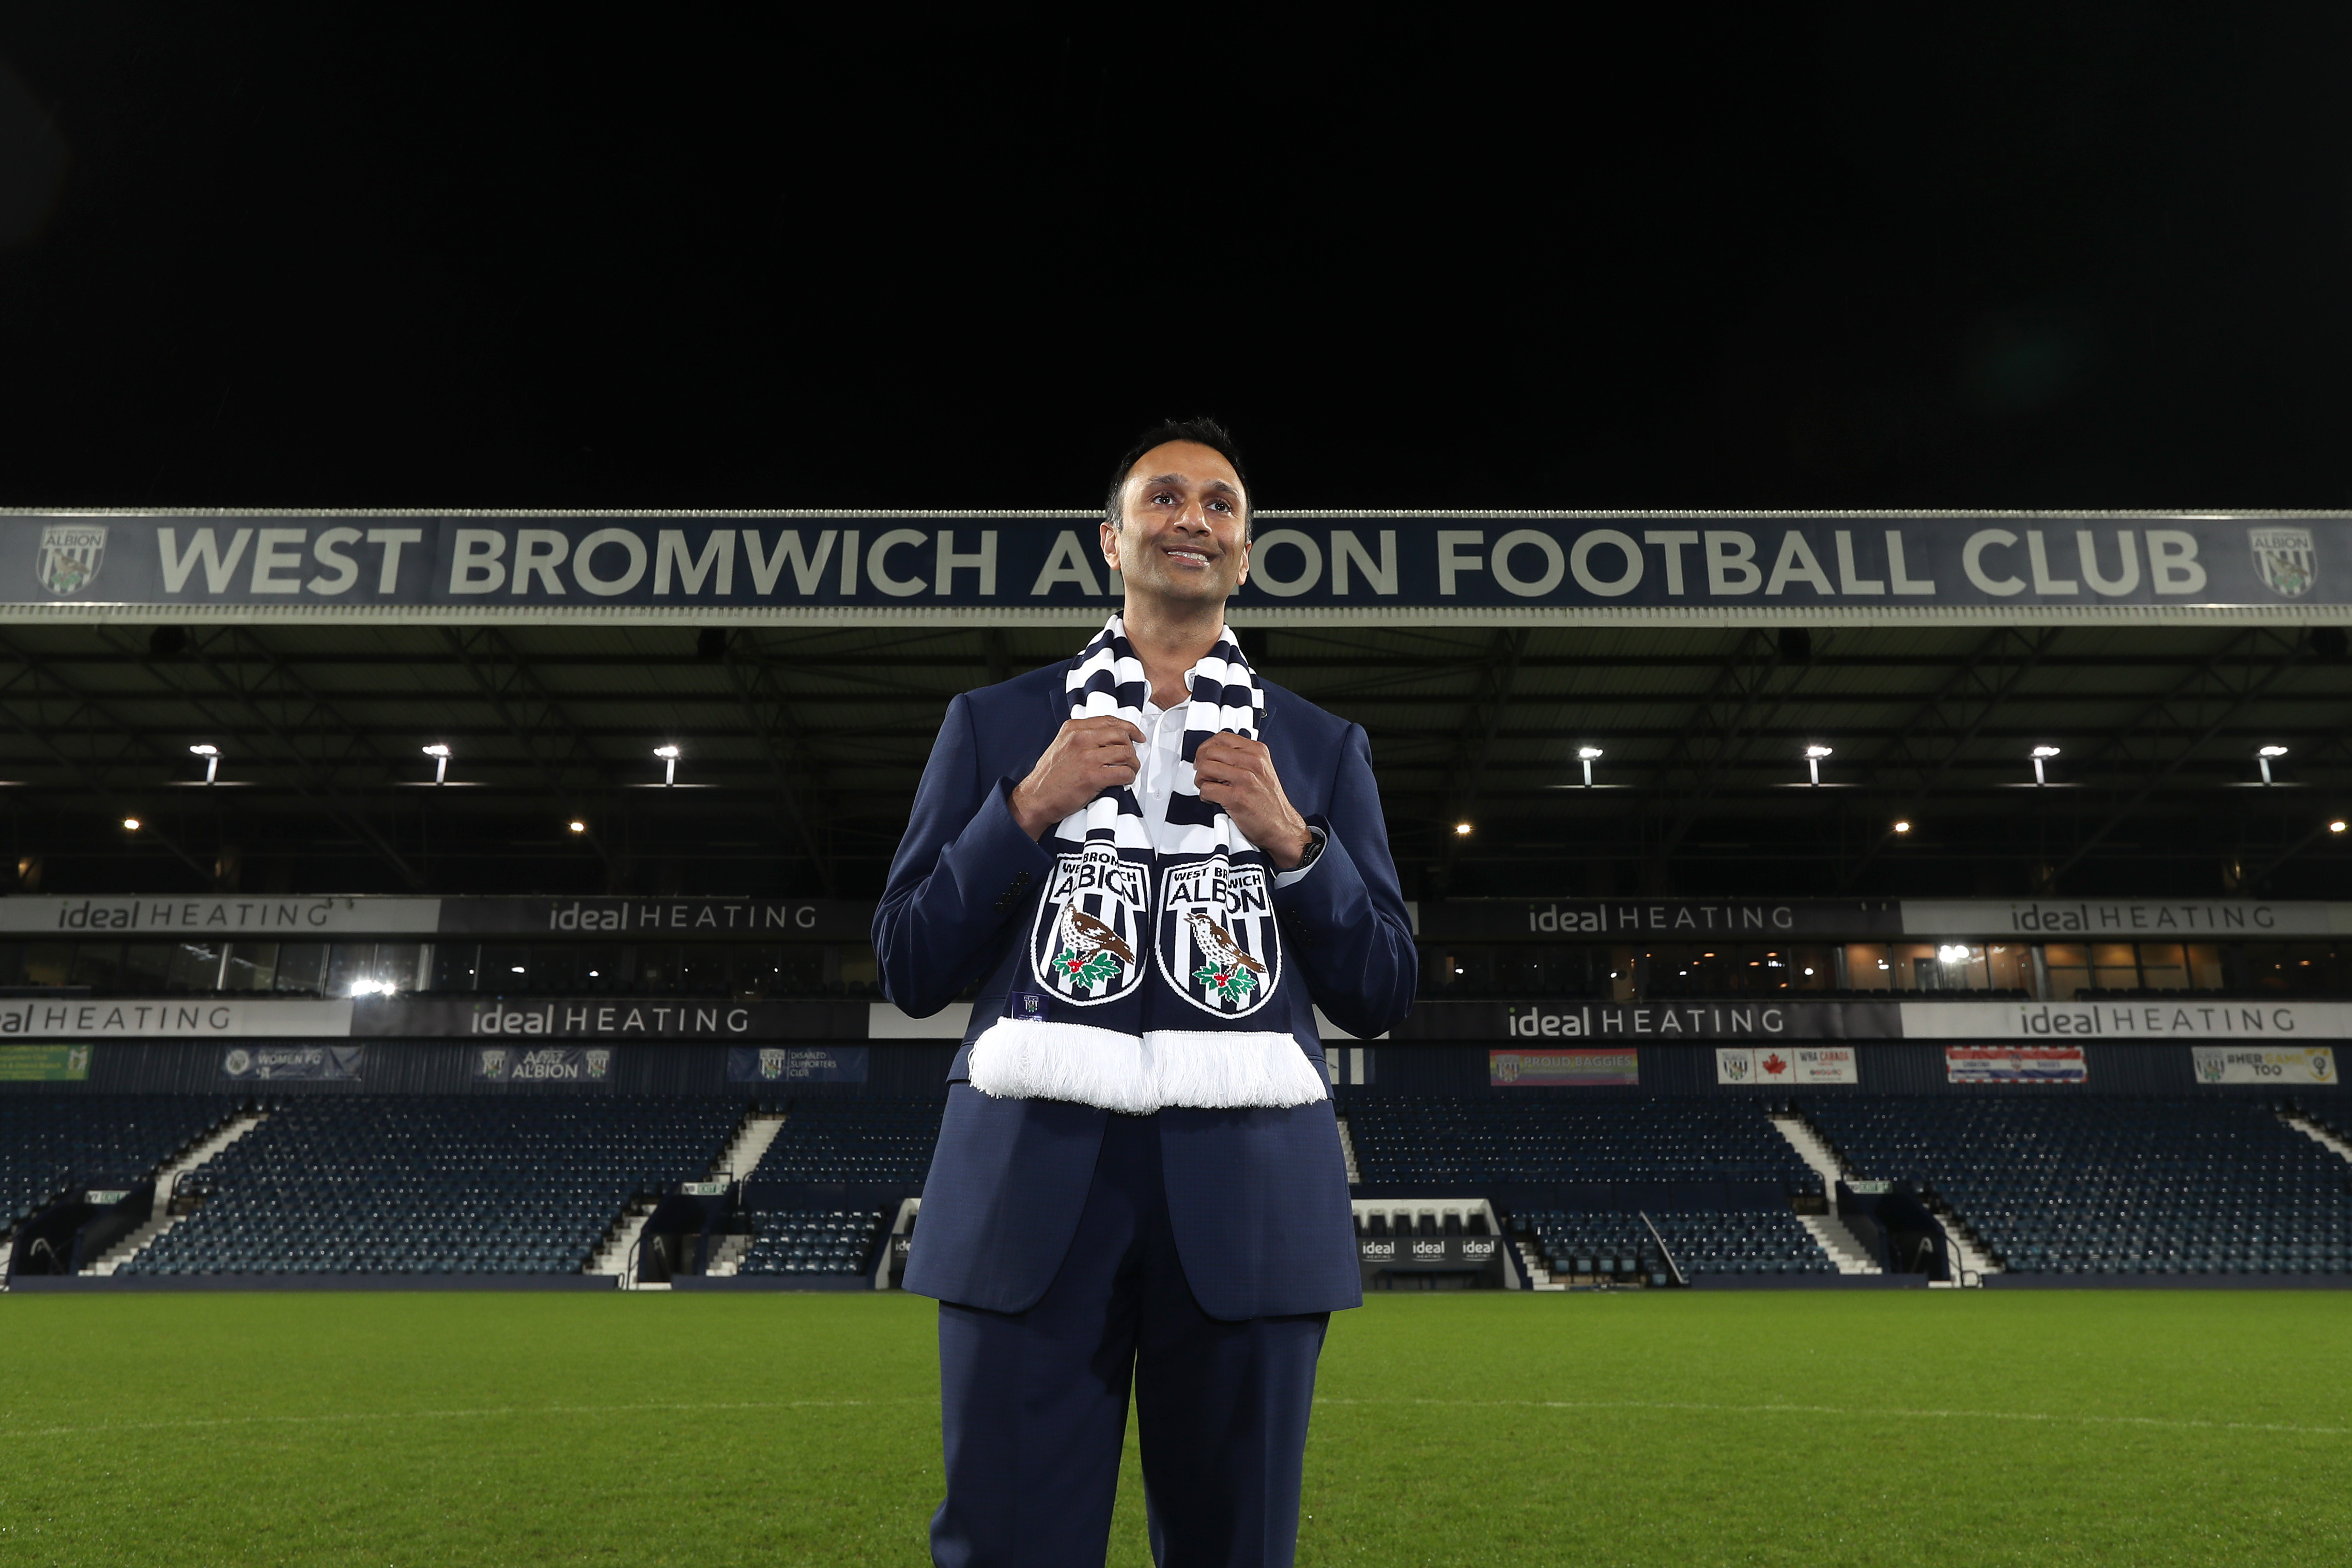 Shilen Patel standing on the pitch at The Hawthorns with the Halfords Lane stand in the background with an Albion scarf around his neck